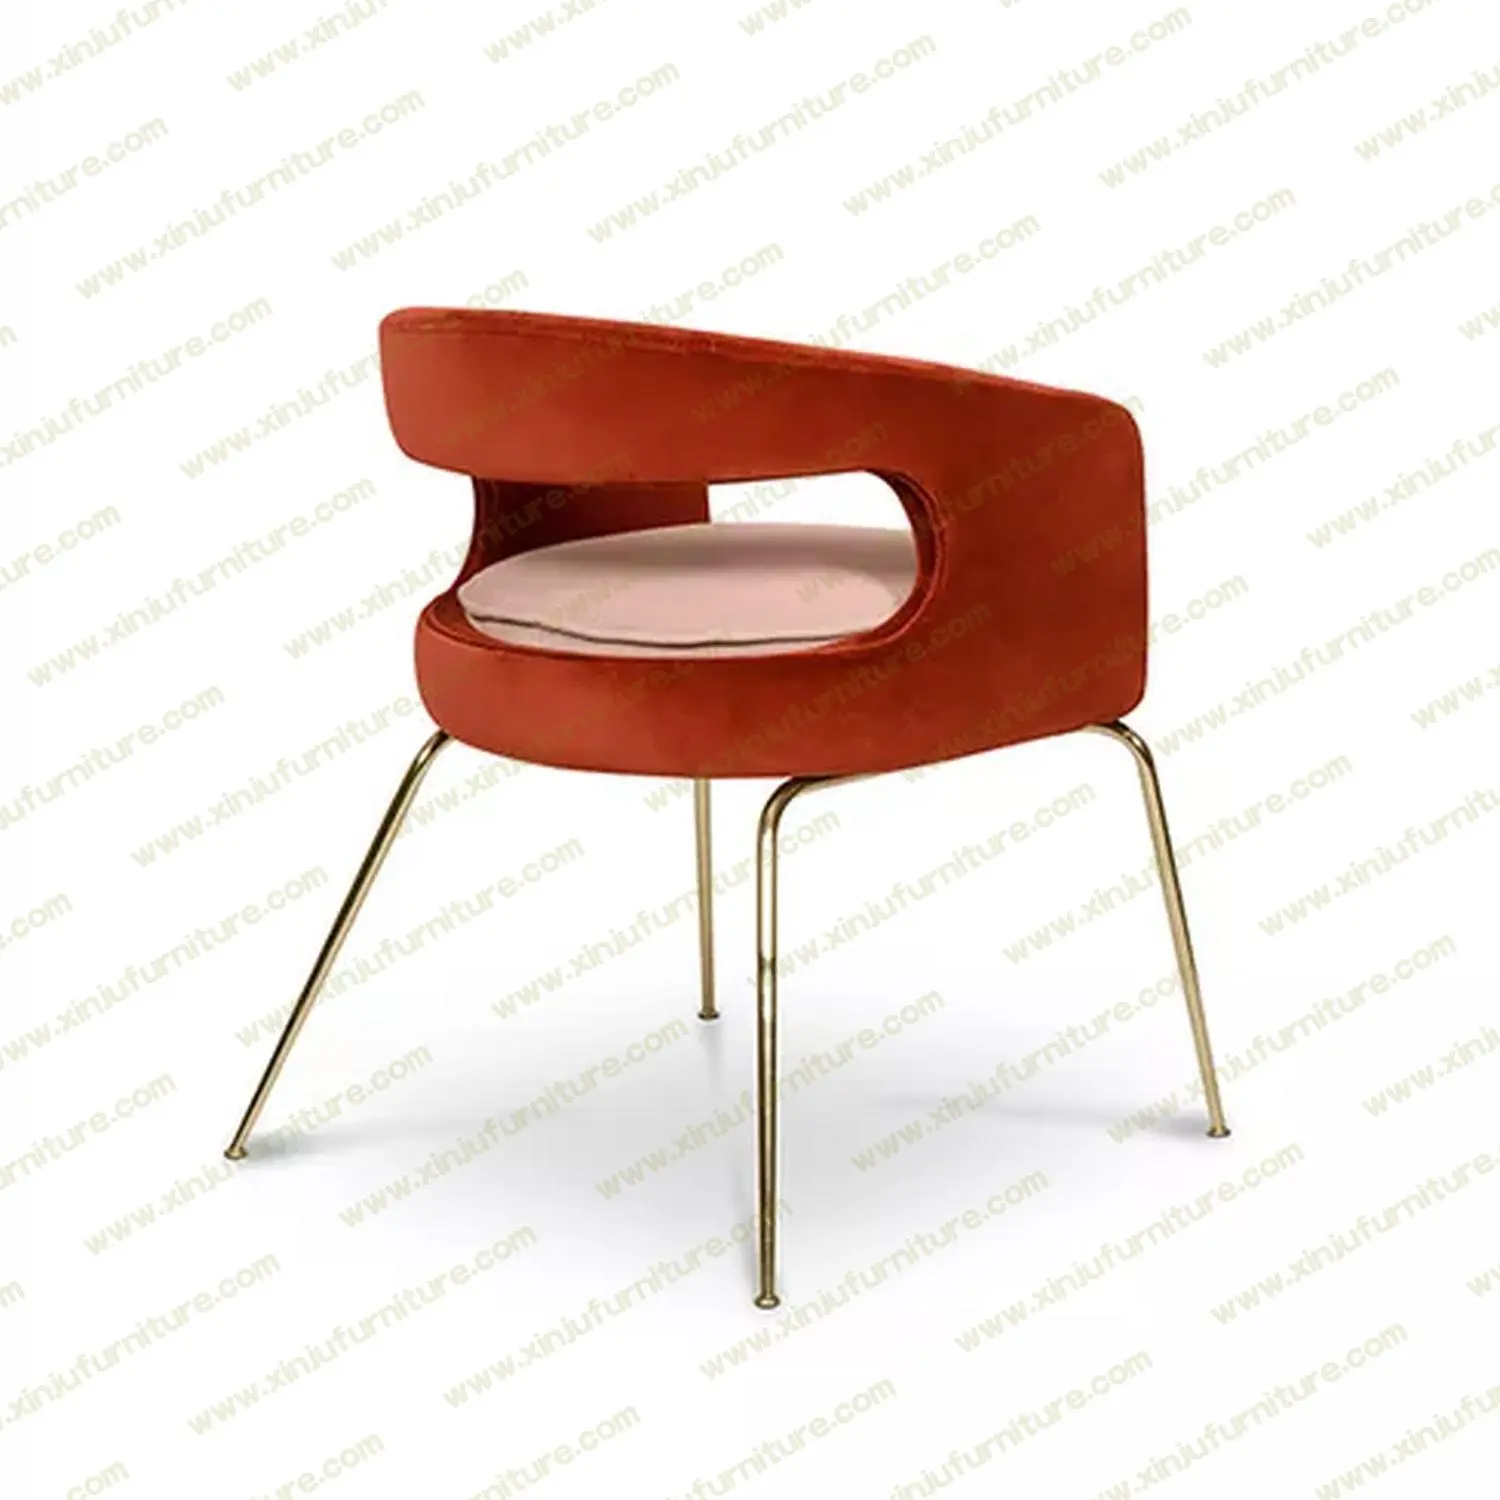 Hollow back design thickened dining chair for restaurant